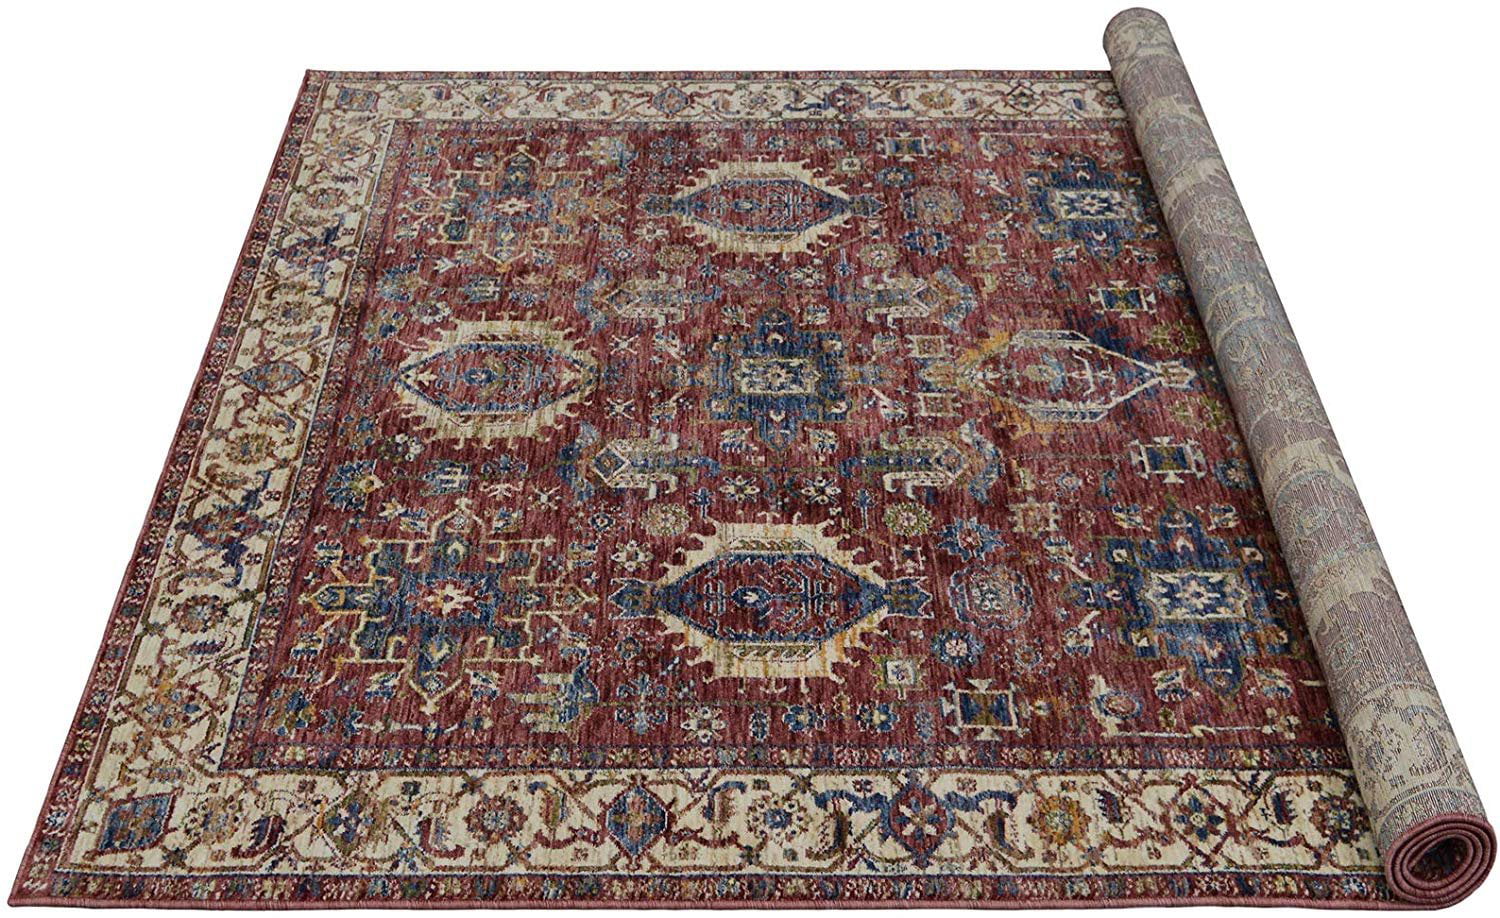 5'x7' HR-Traditional Rugs/bijar Collection/Fashion Home Oriental|Persian Vintage Area Rugs-Distressed Copper/Multi 